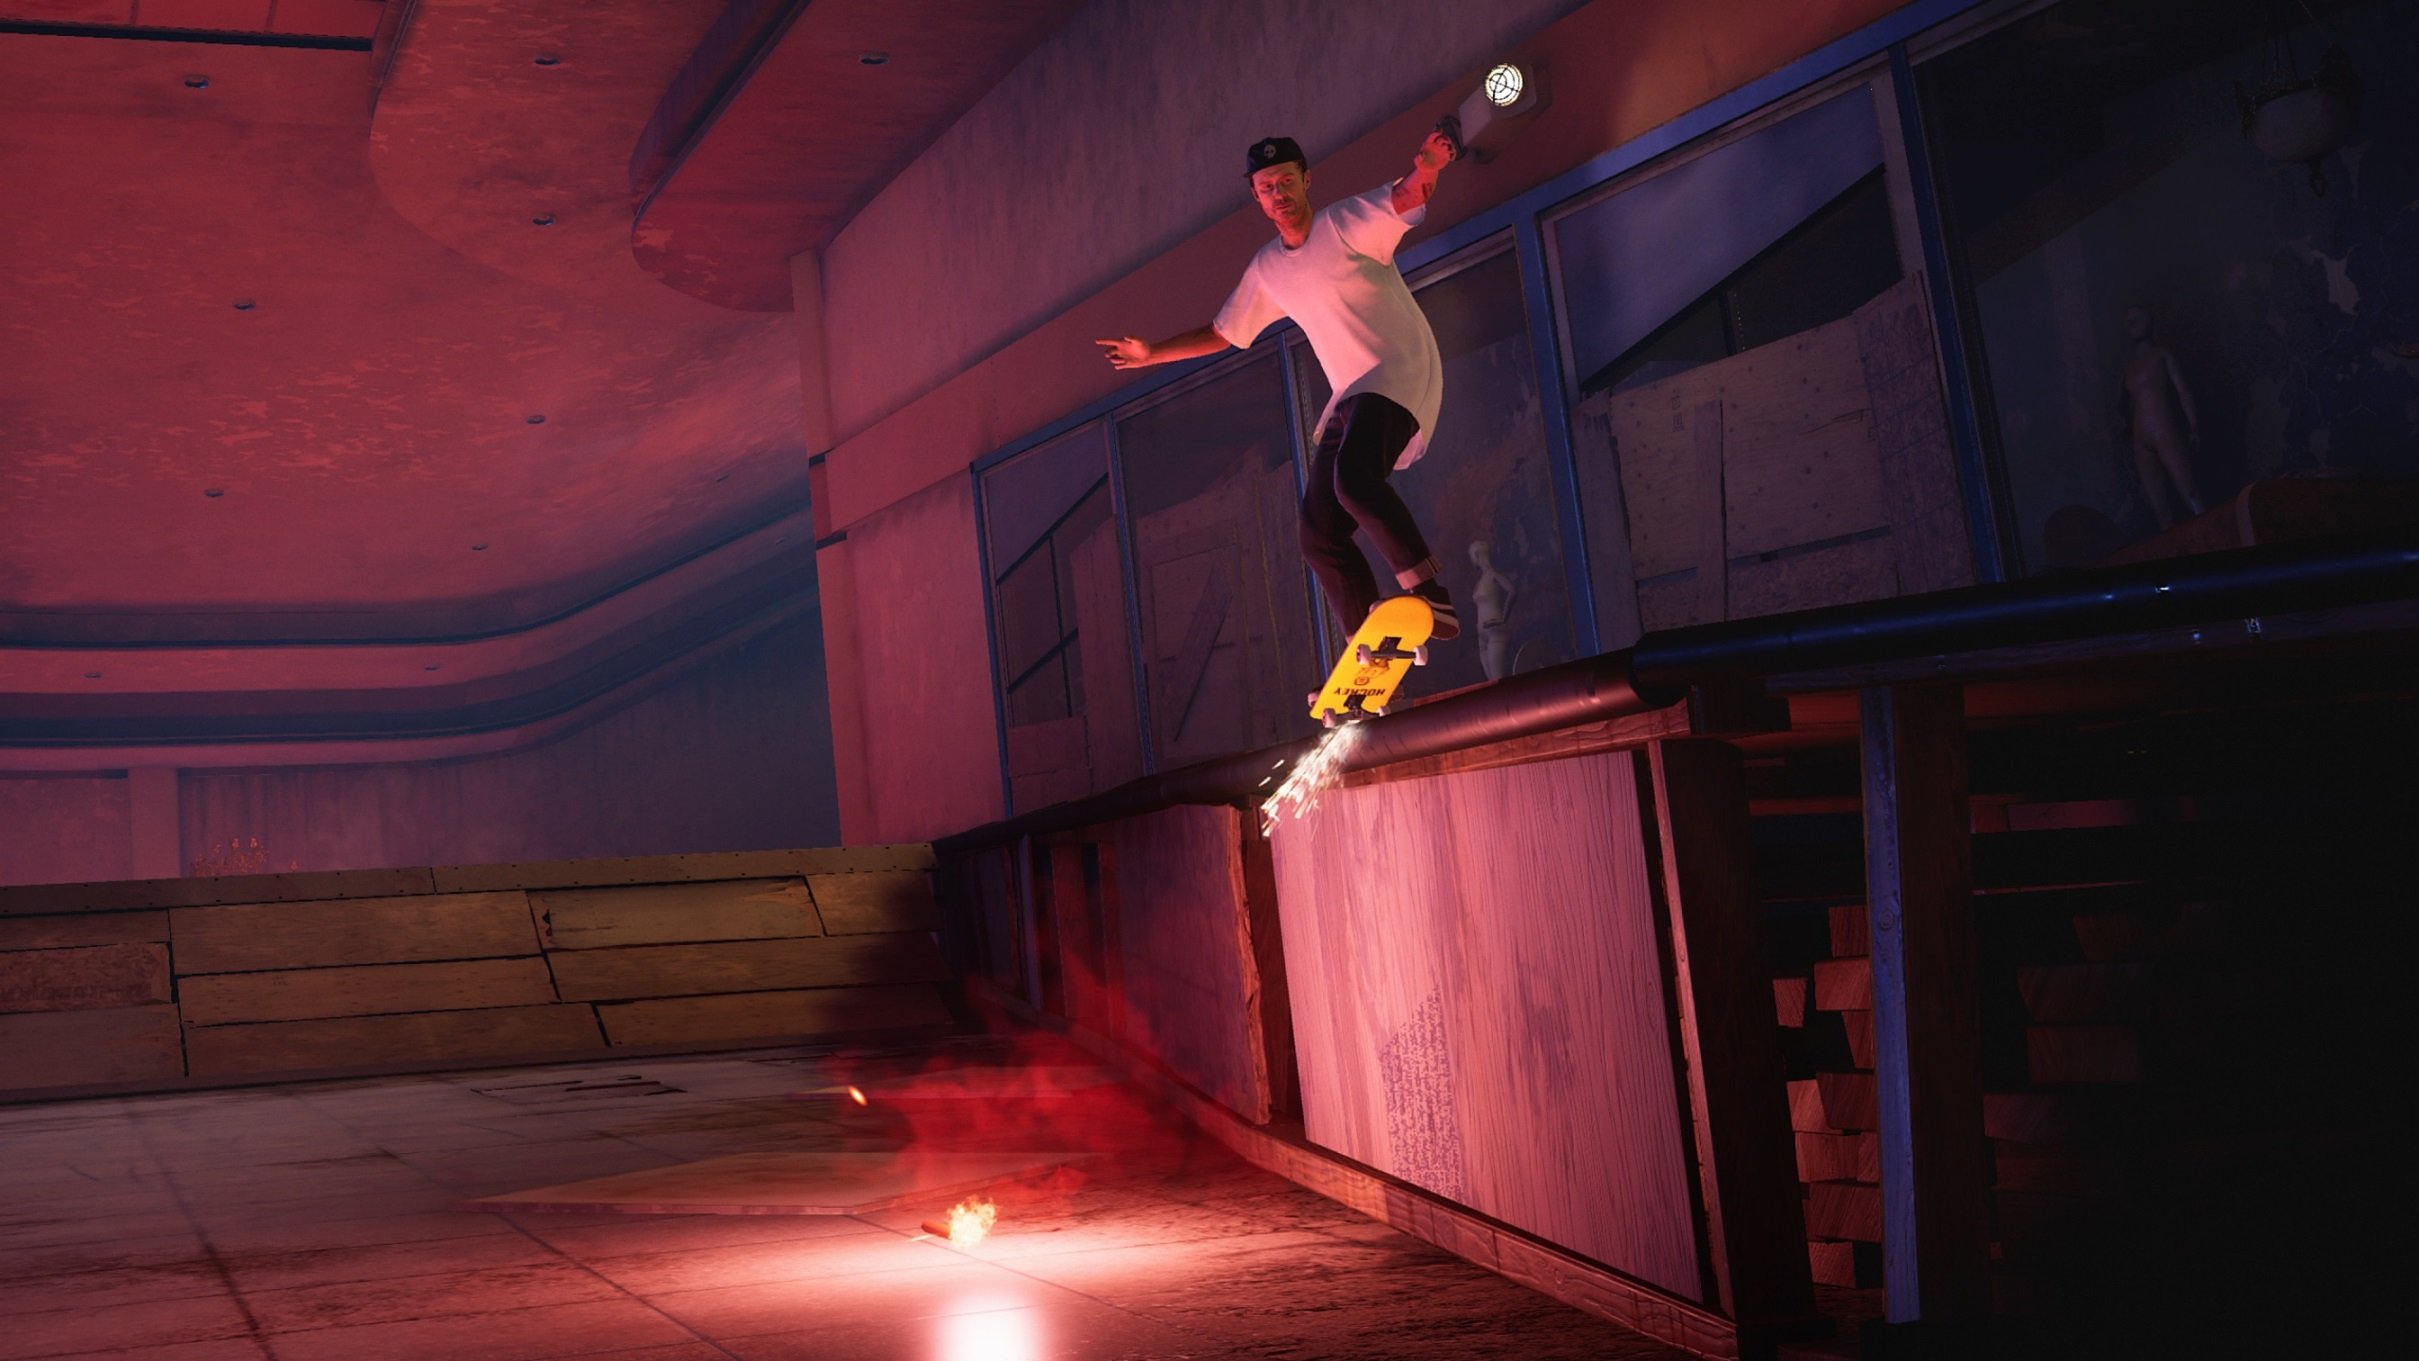 Create A Skater Mode Is Back (3)